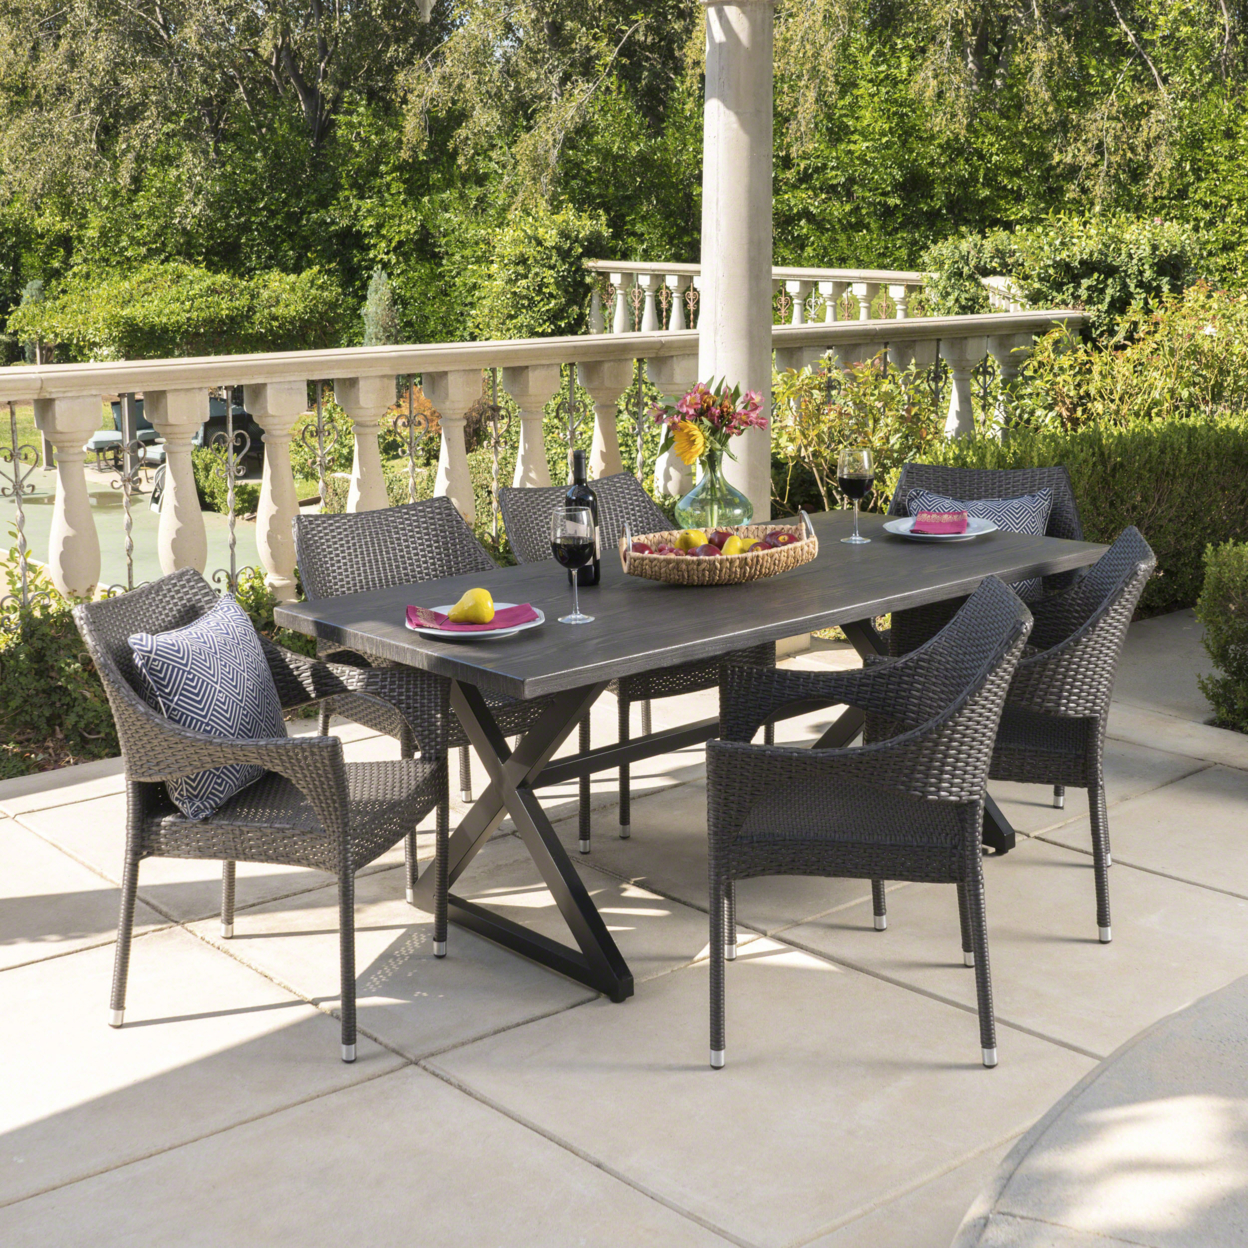 Graywood Outdoor 7 Piece Wicker Dining Set With Rectangular Aluminum Table - Black/Multi-brown